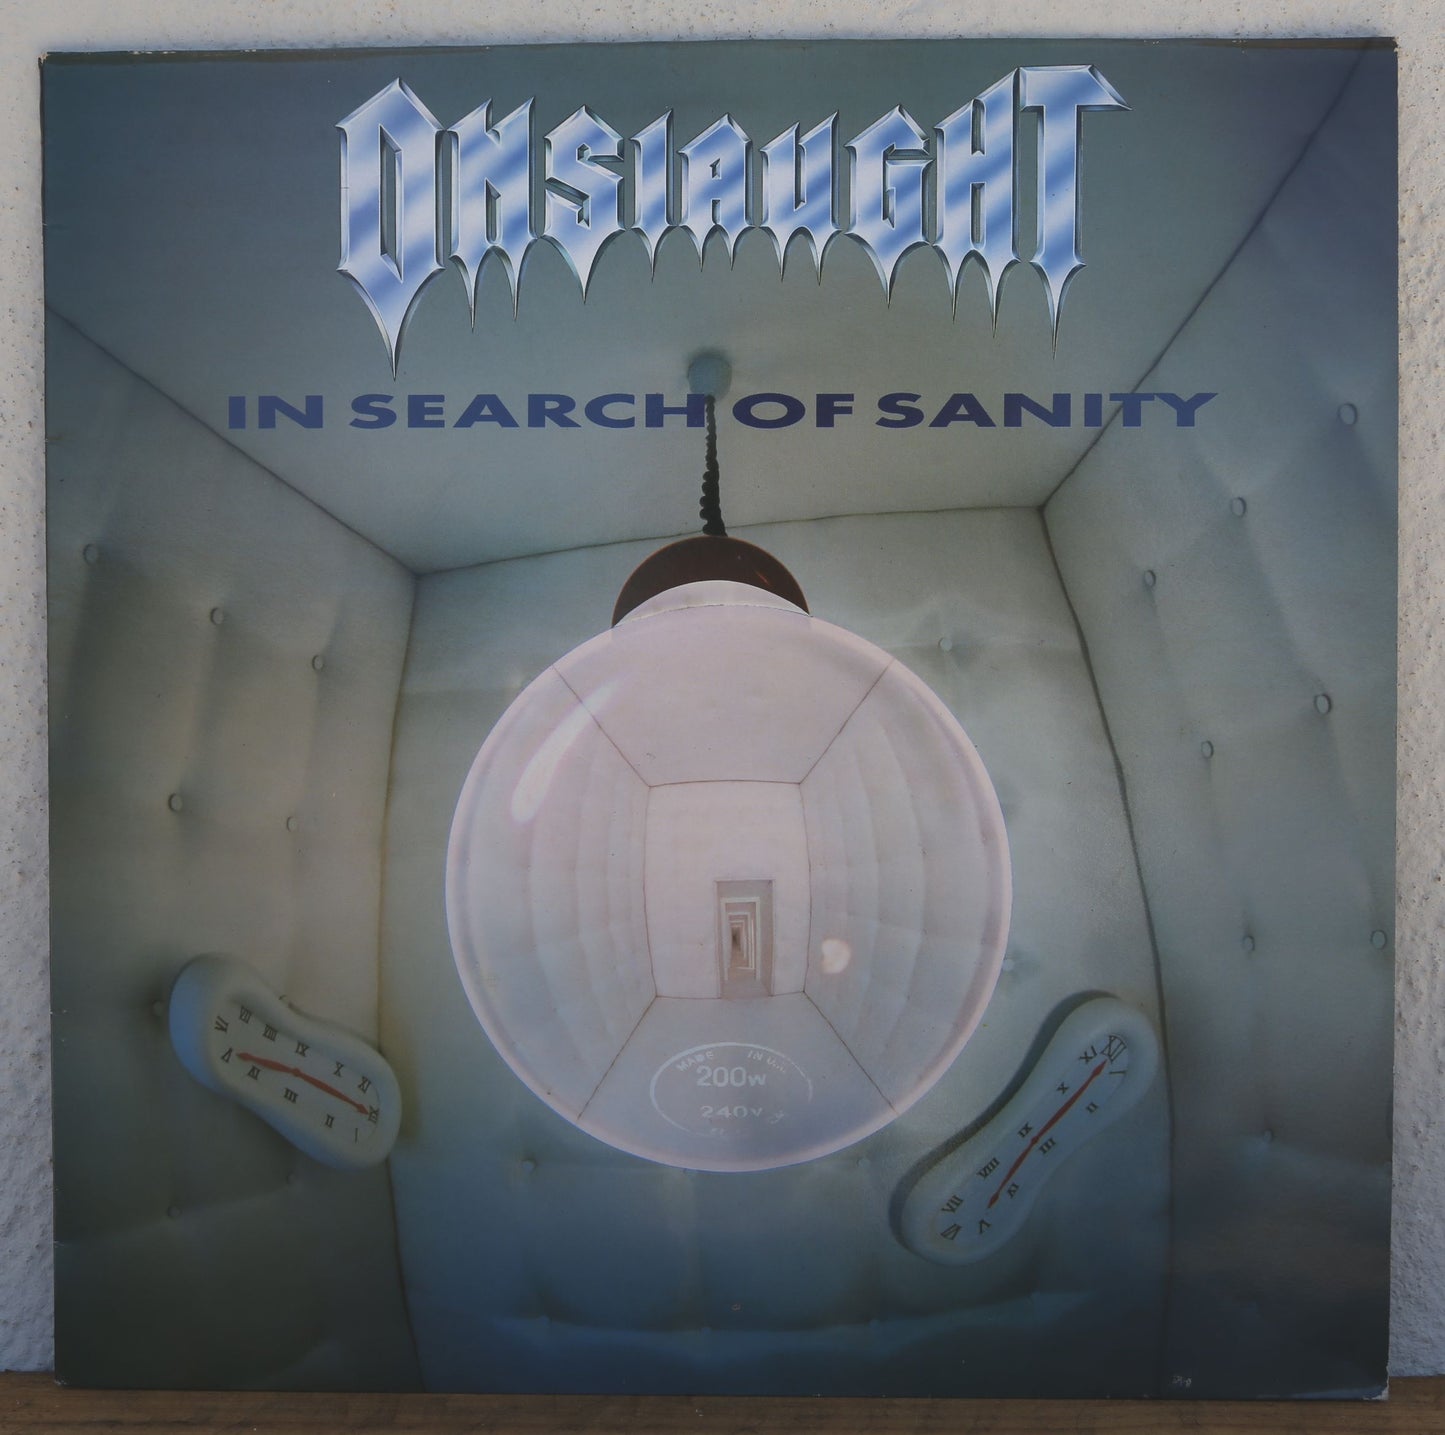 Onslaught - In search of sanity